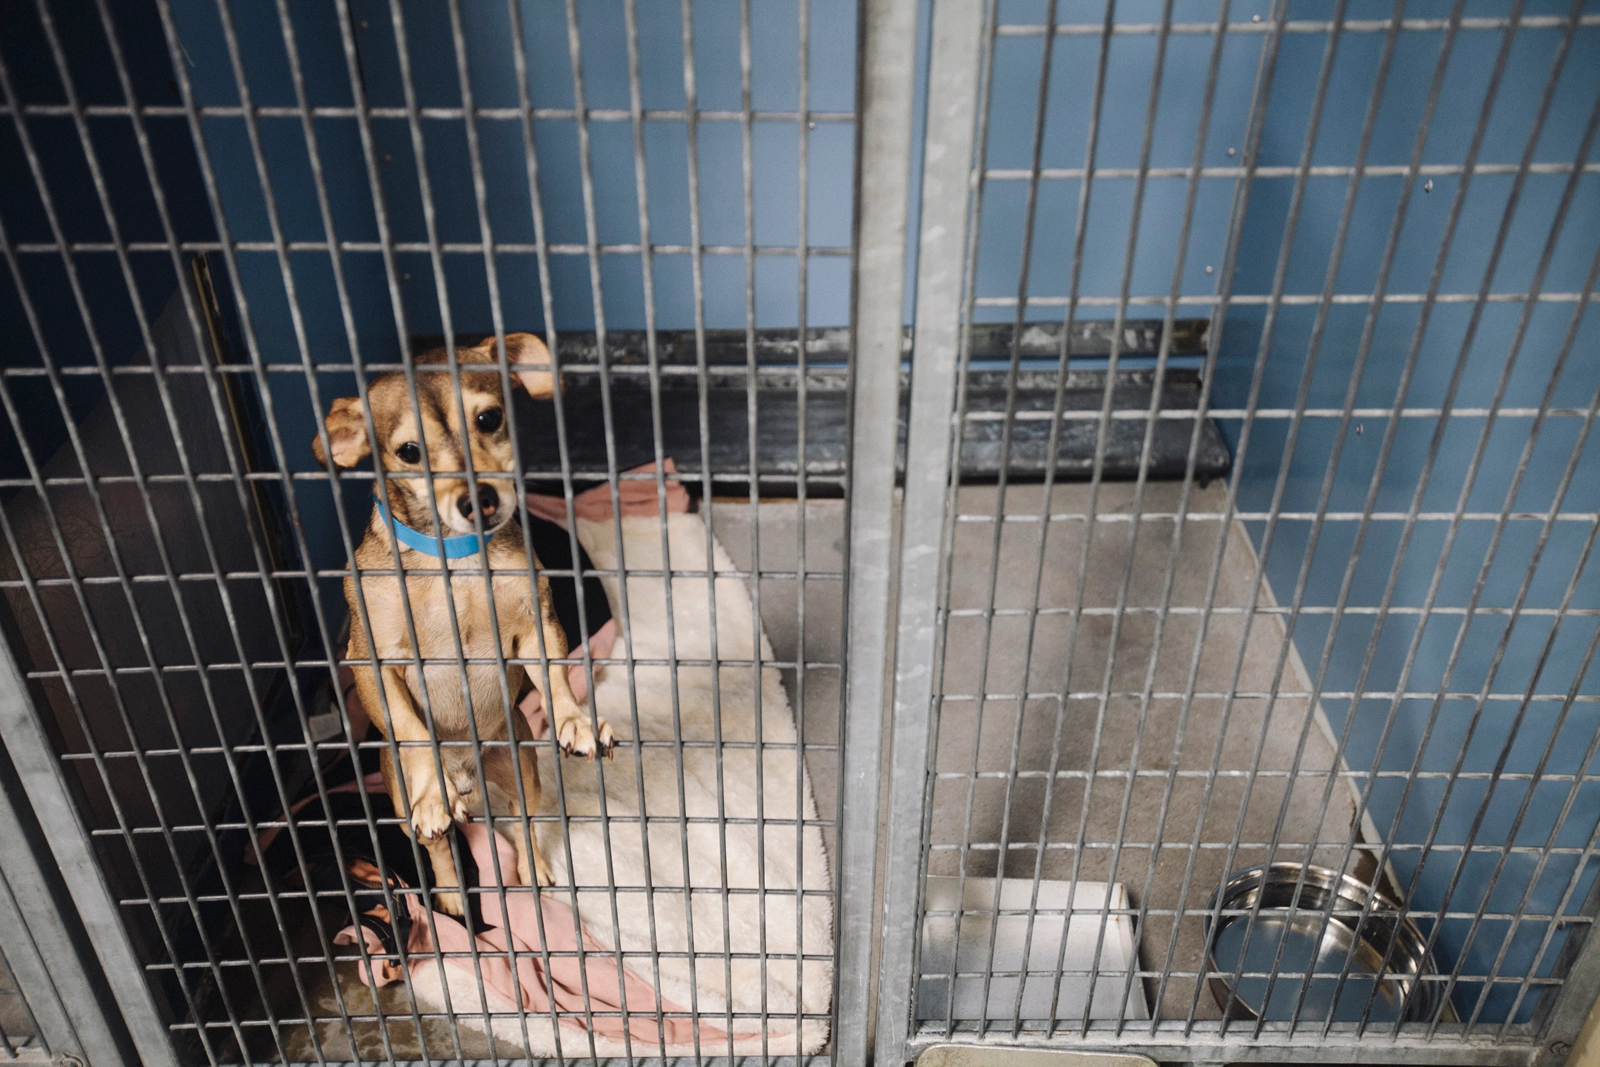 What animal shelters are in Las Vegas?